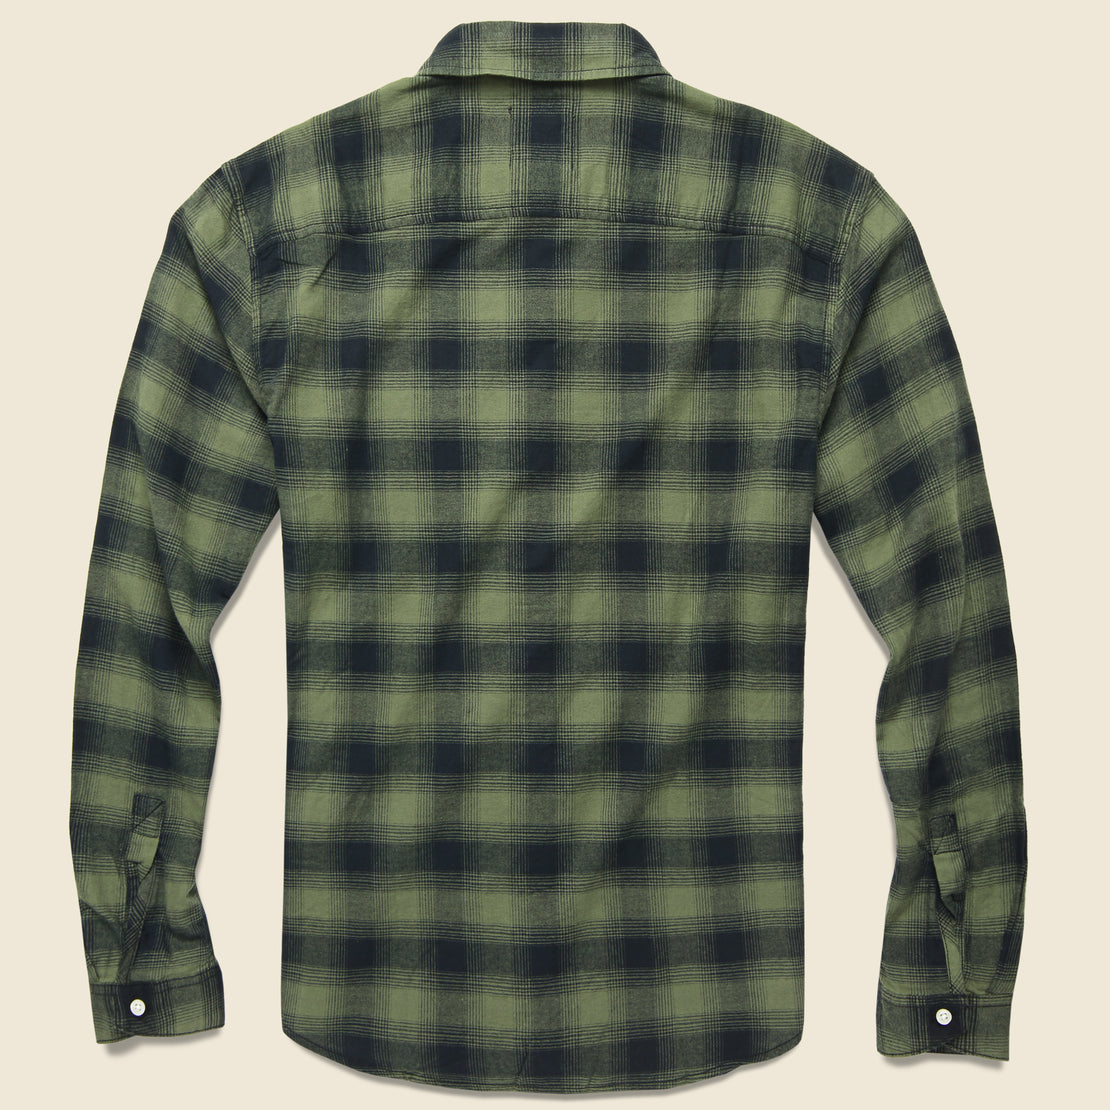 Lumberjack Flannel - Sprig - Life After Denim - STAG Provisions - Tops - L/S Woven - Plaid